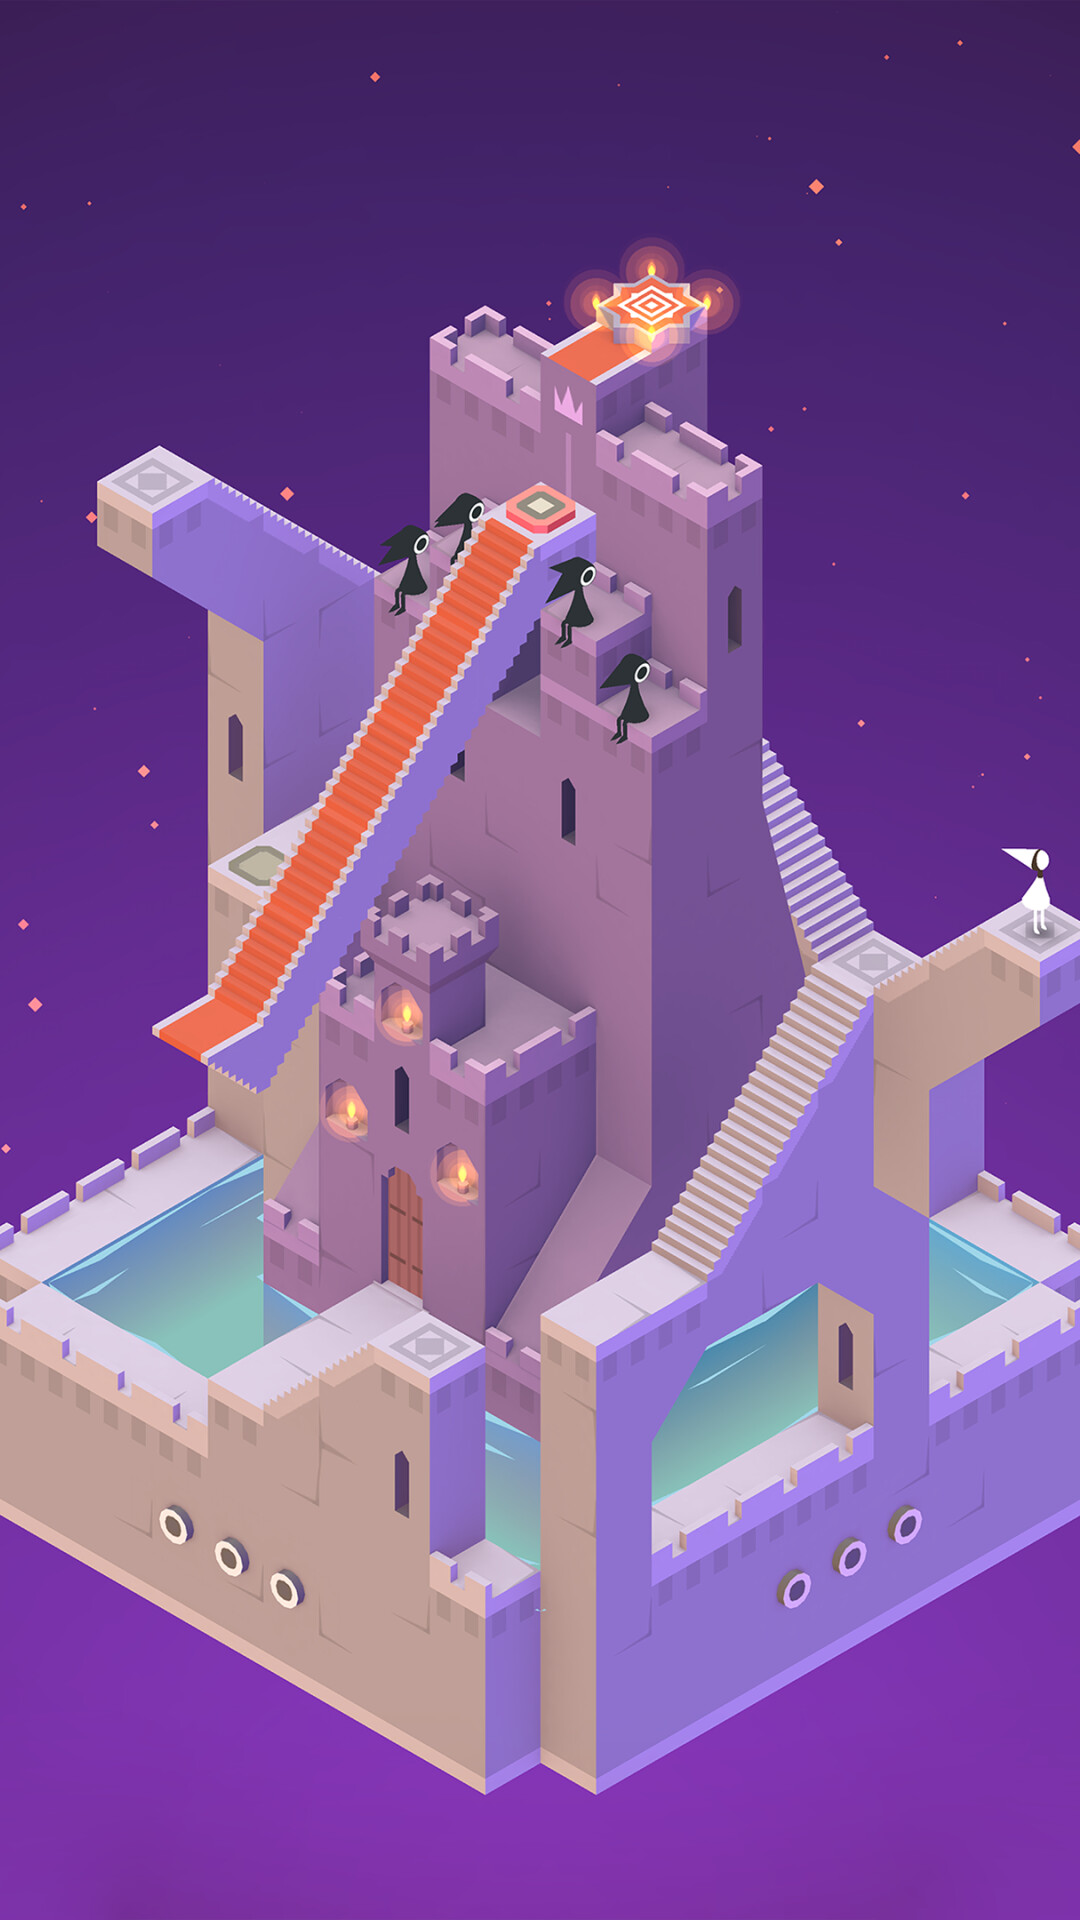 Monument Valley: It centers around Princess Ida navigating through seemingly impossible mazes by interacting with her surroundings, Indie game. 1080x1920 Full HD Background.